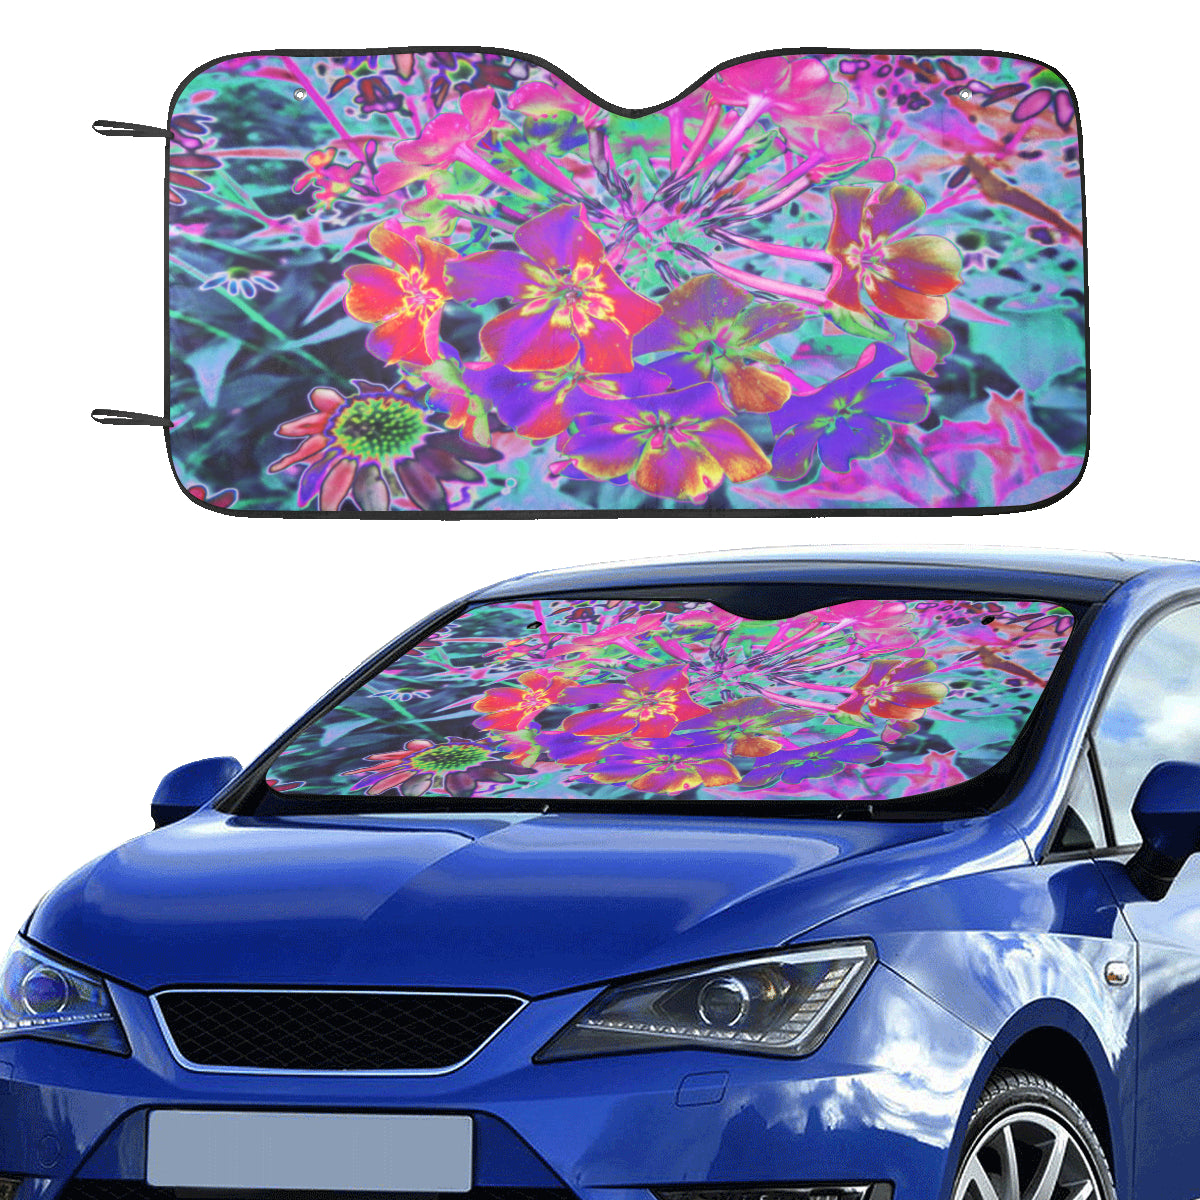 Auto Sun Shade, Dramatic Psychedelic Colorful Red and Purple Flowers